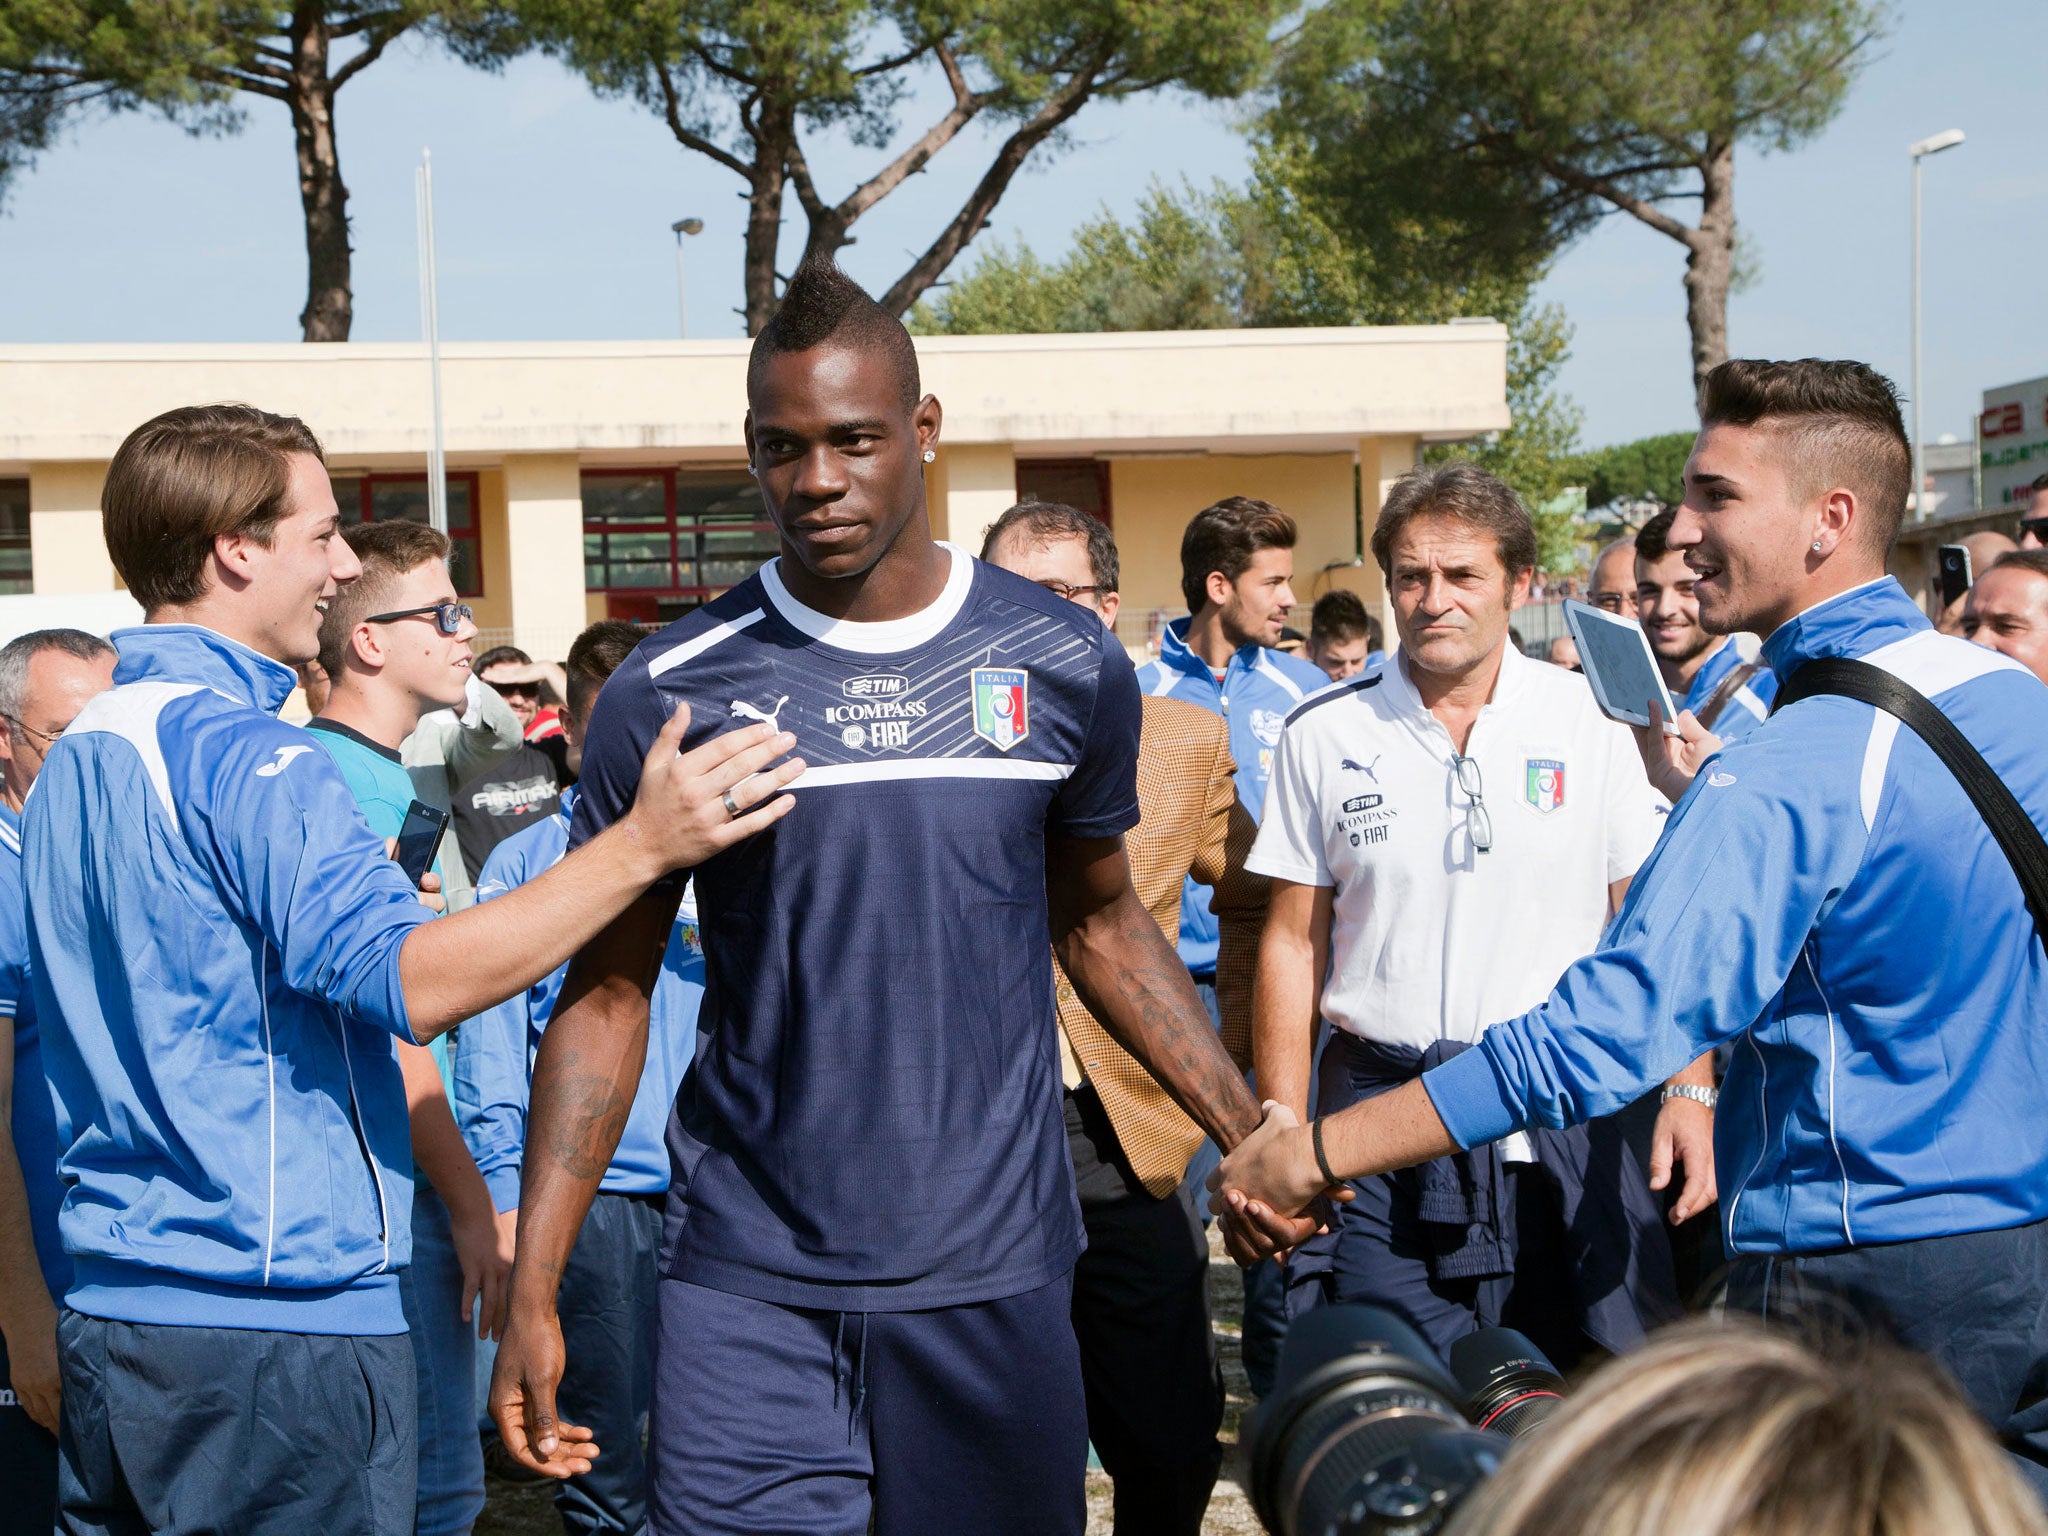 Mario Balotelli is greeted by Italian supporters ahead of their training session in Quarto